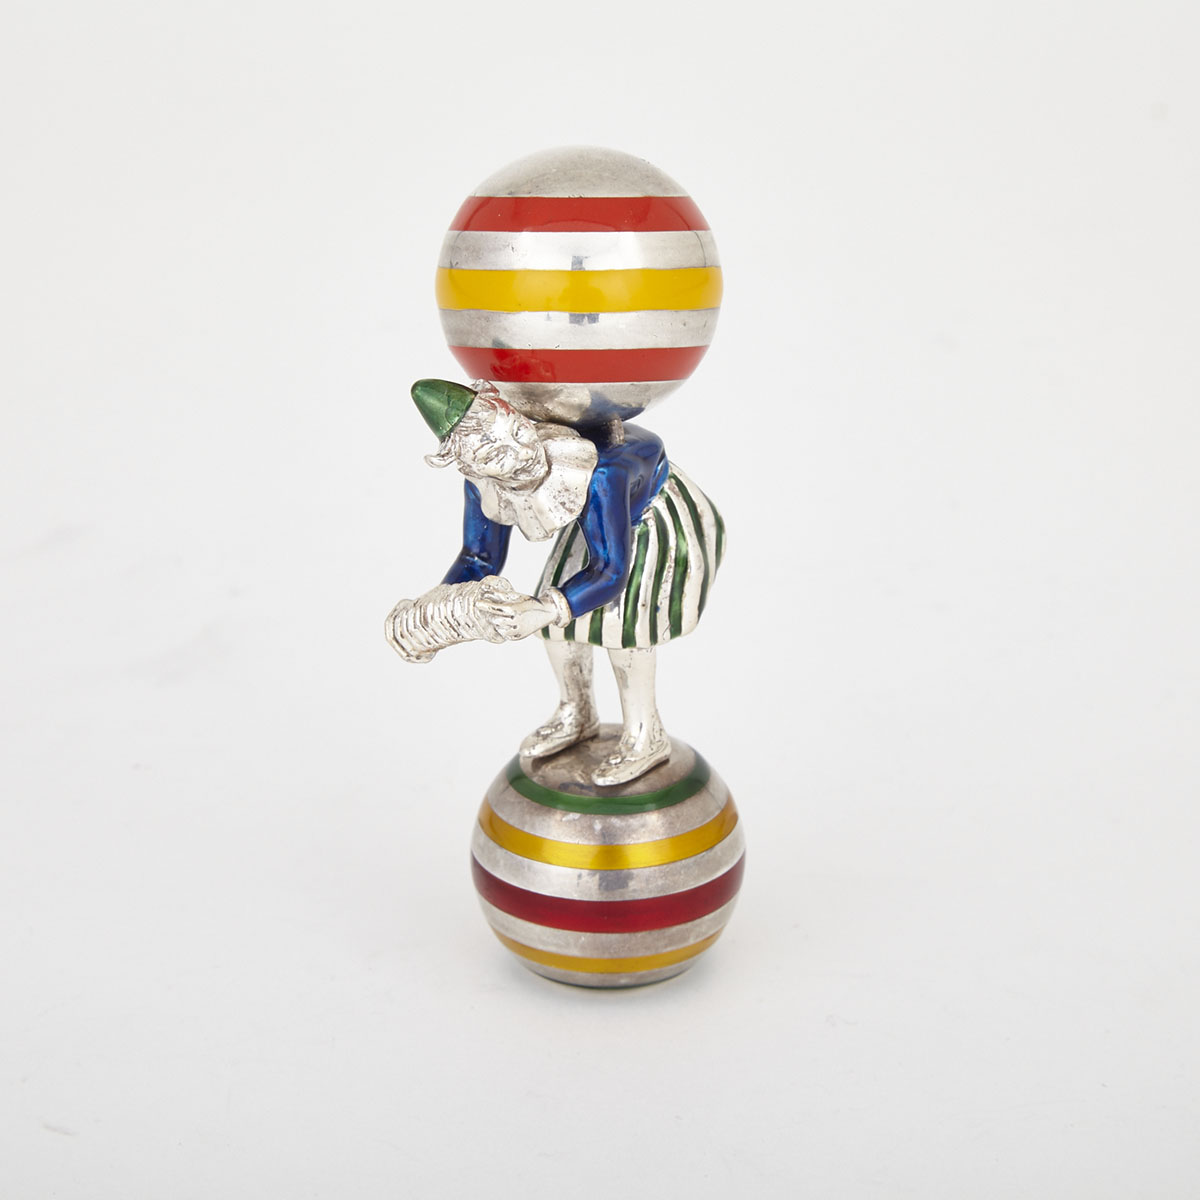 Italian Silver and Enamel Circus Clown with Accordion and Two Large Balls, Gene Moore for Tiffany & Co., New York, c.1988